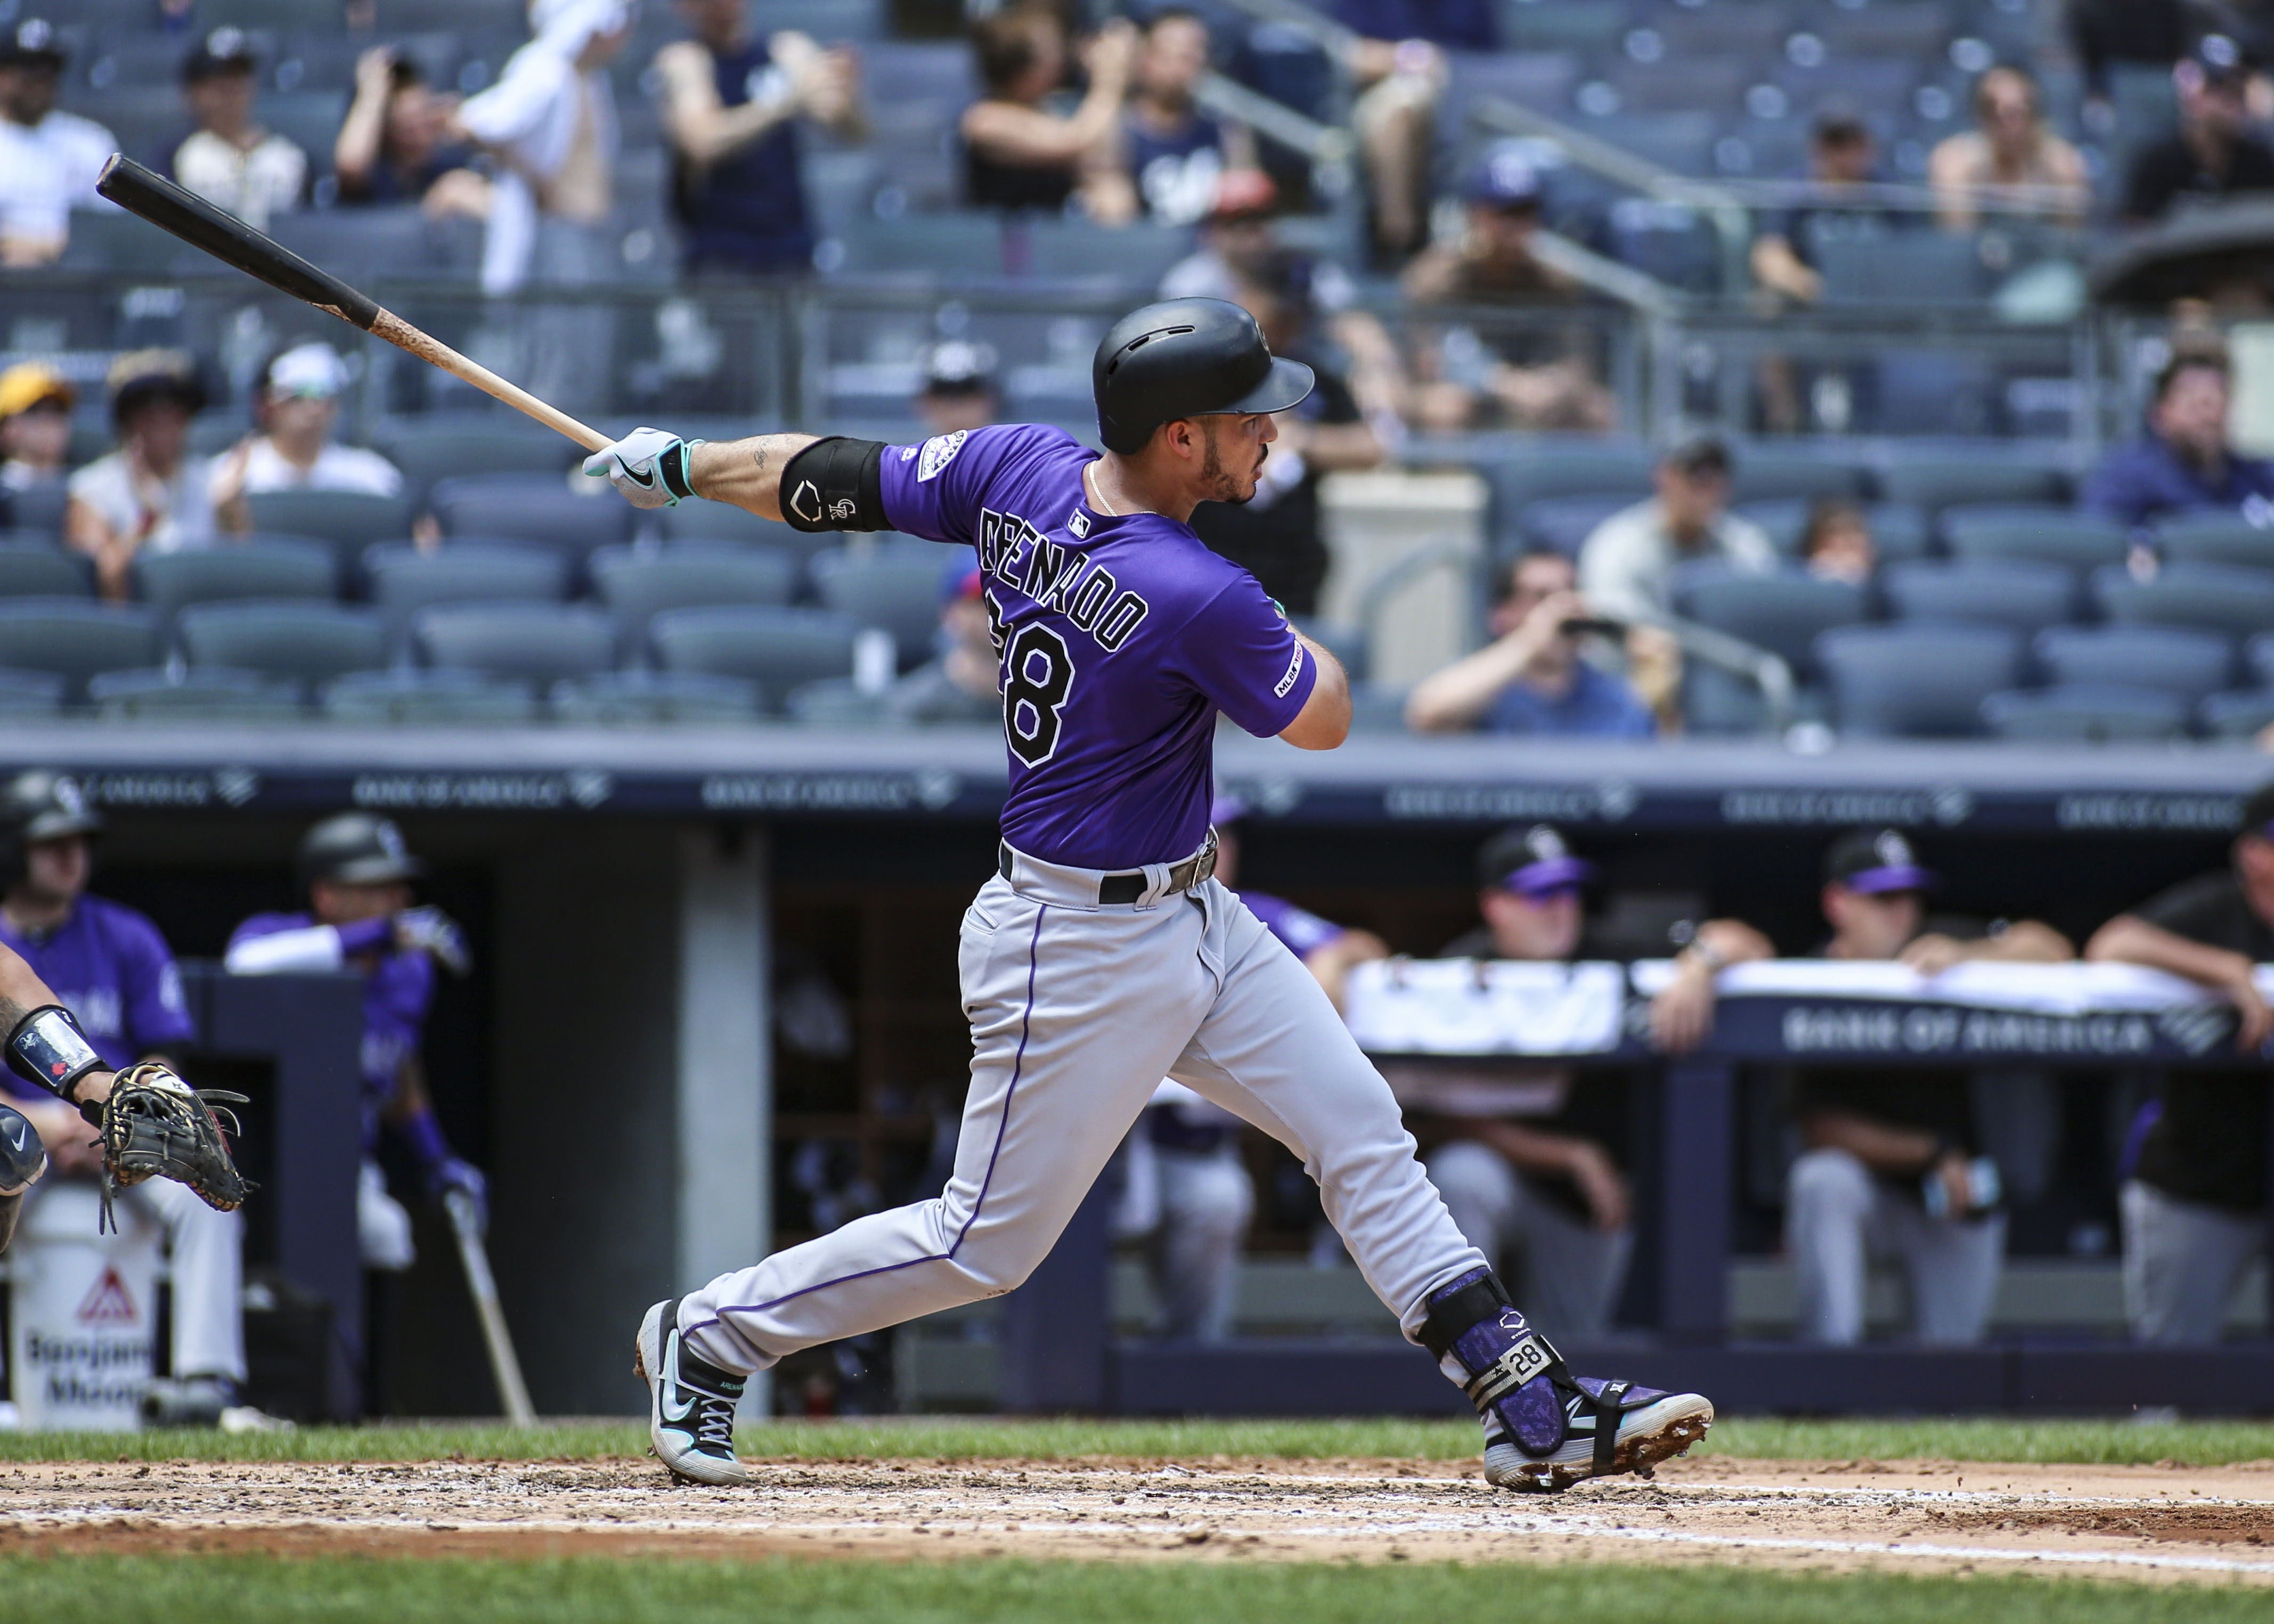 Rockies avoid sweep, come through with big win over Yankees